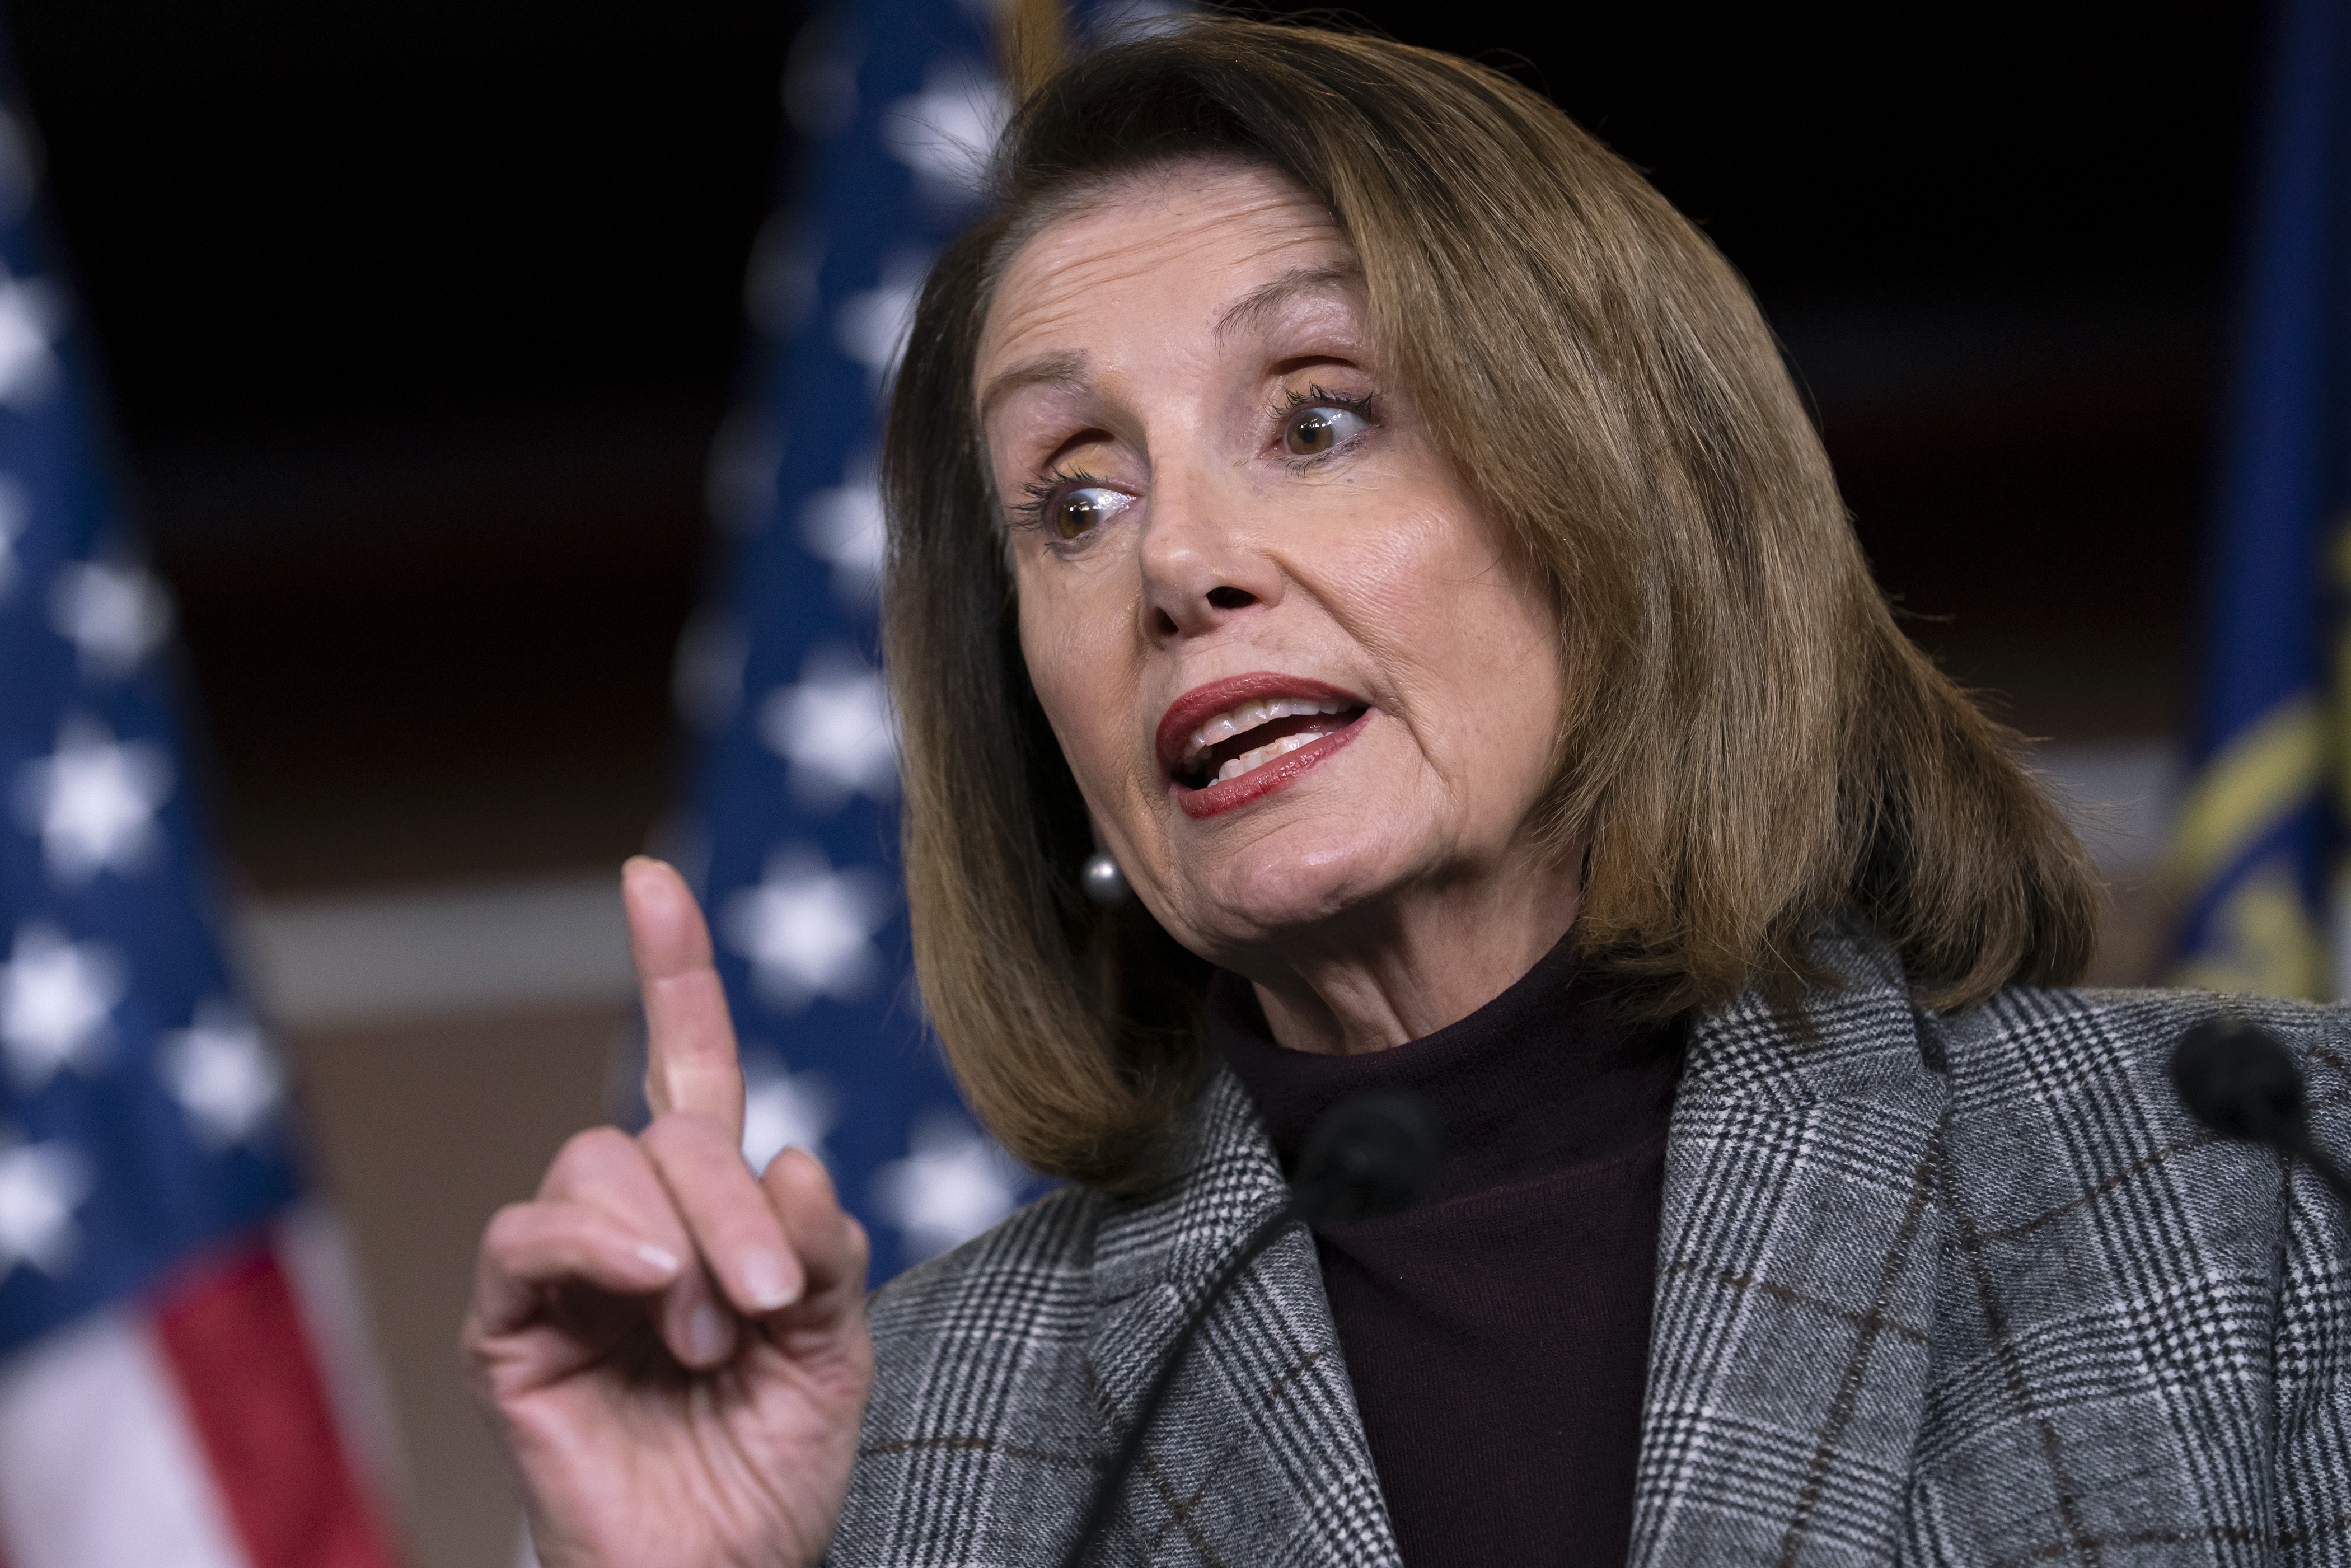 Trump Returns Home to Another Accusatory NYT Report; Pelosi Goes Off, Won't Commit to Green New Deal Vote